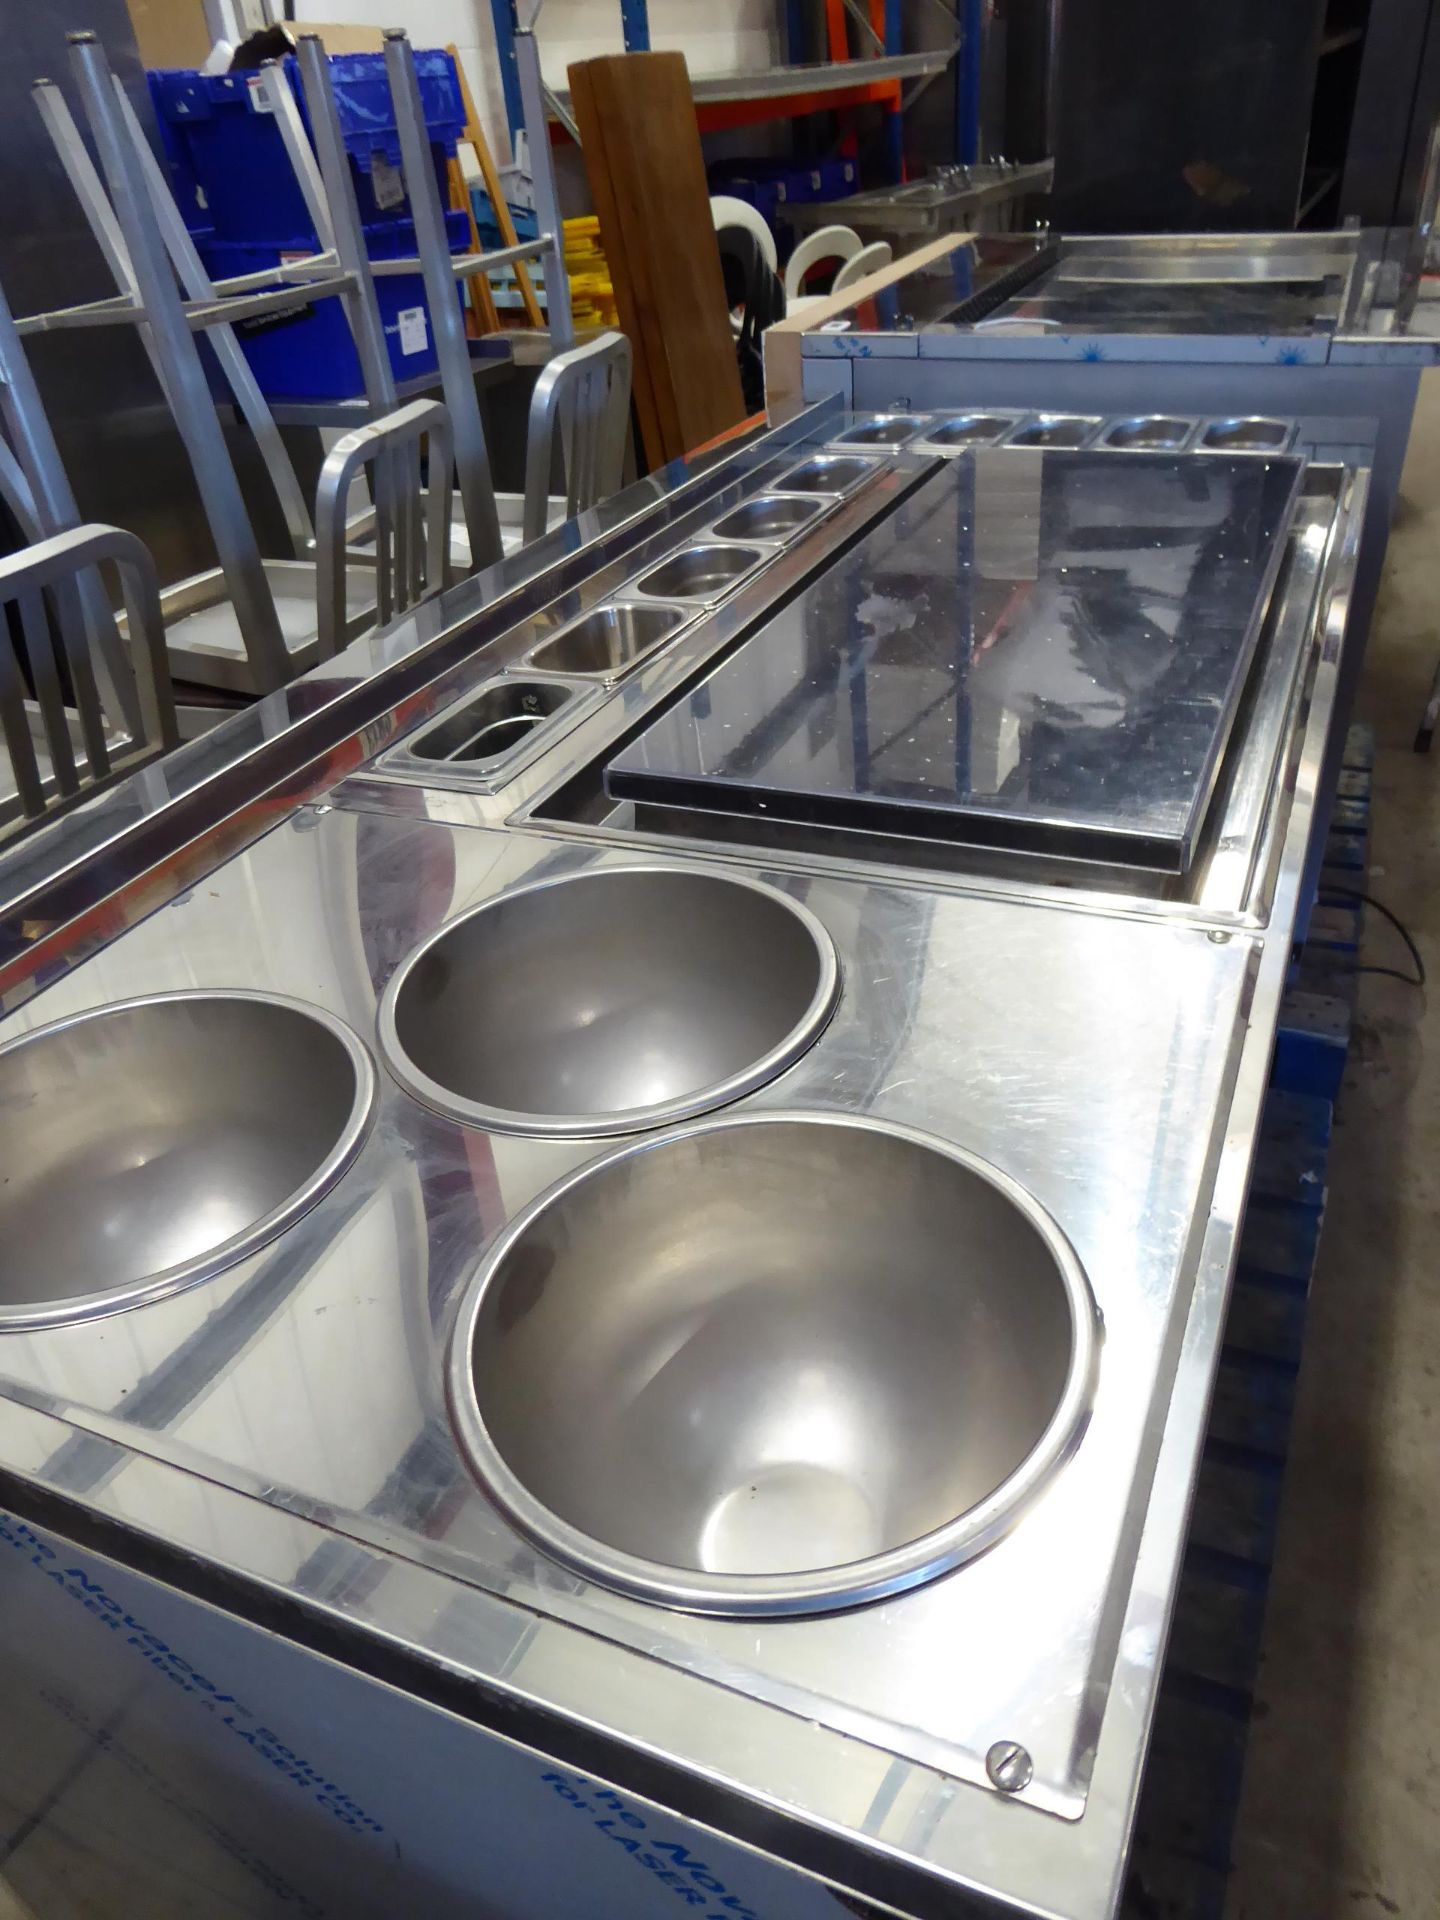 *B MIX refrigerated ice cream counter, with heated bowls and display for the production of personali